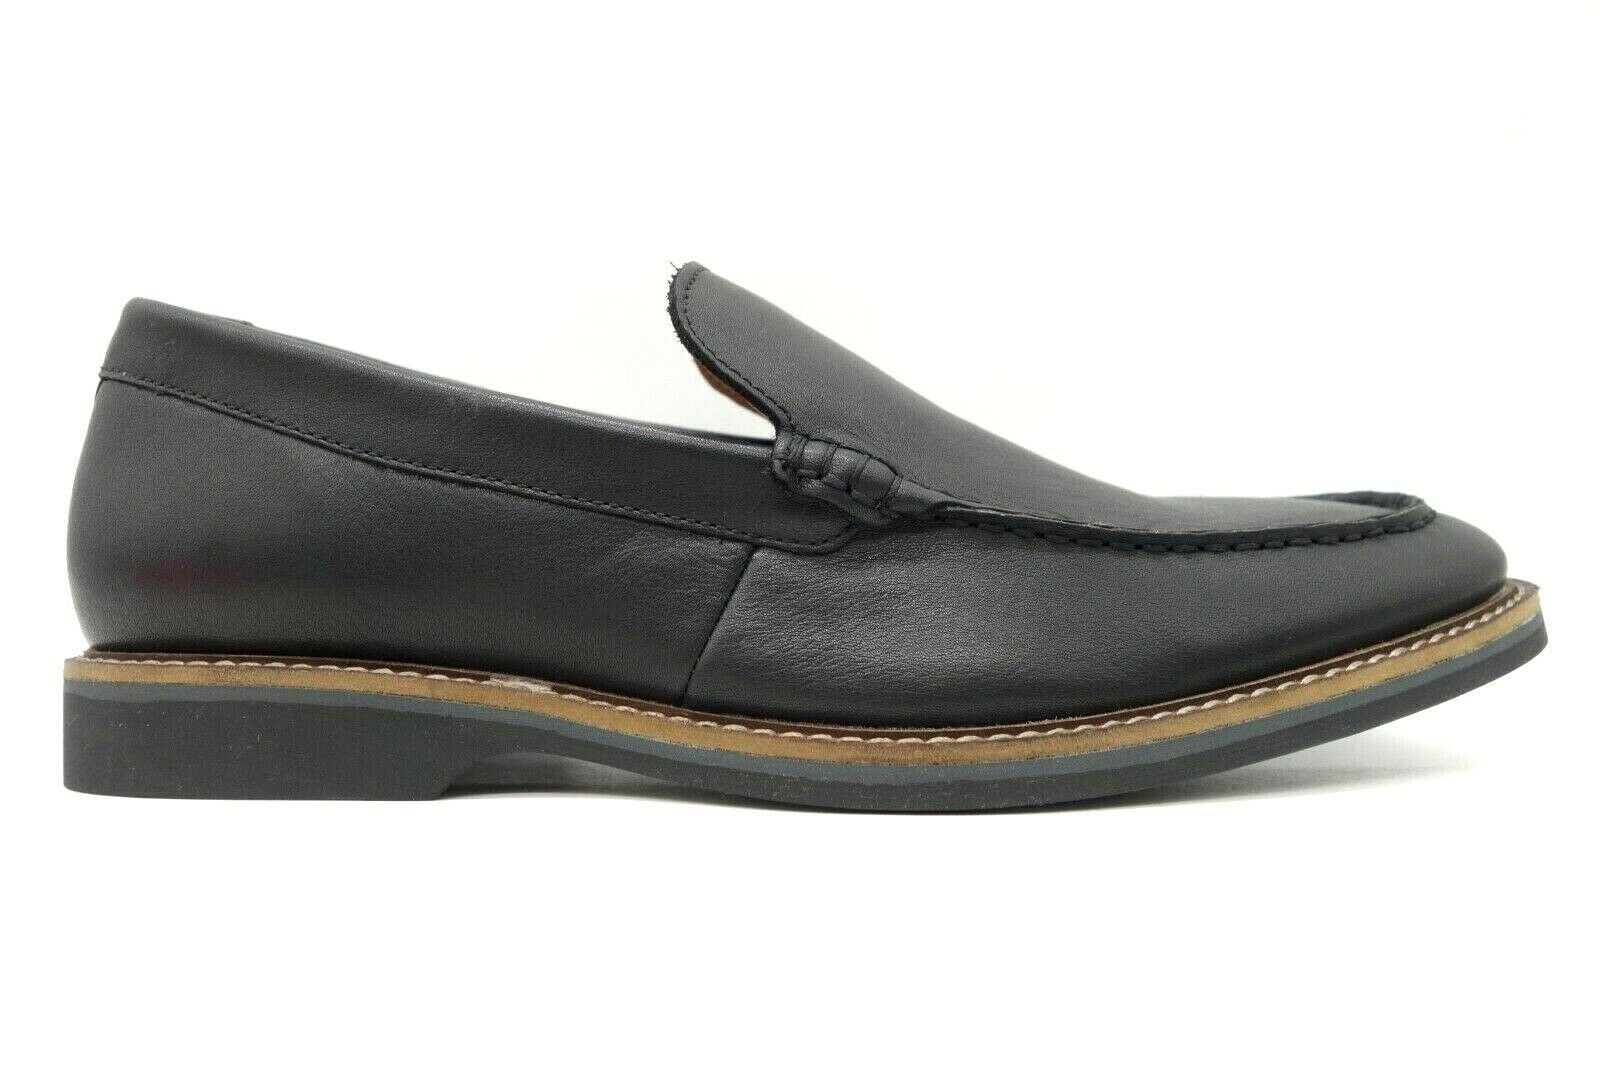 Clarks Atticus Edge Black Leather Slip On Dress Casual Loafers Shoes Men's 9 M